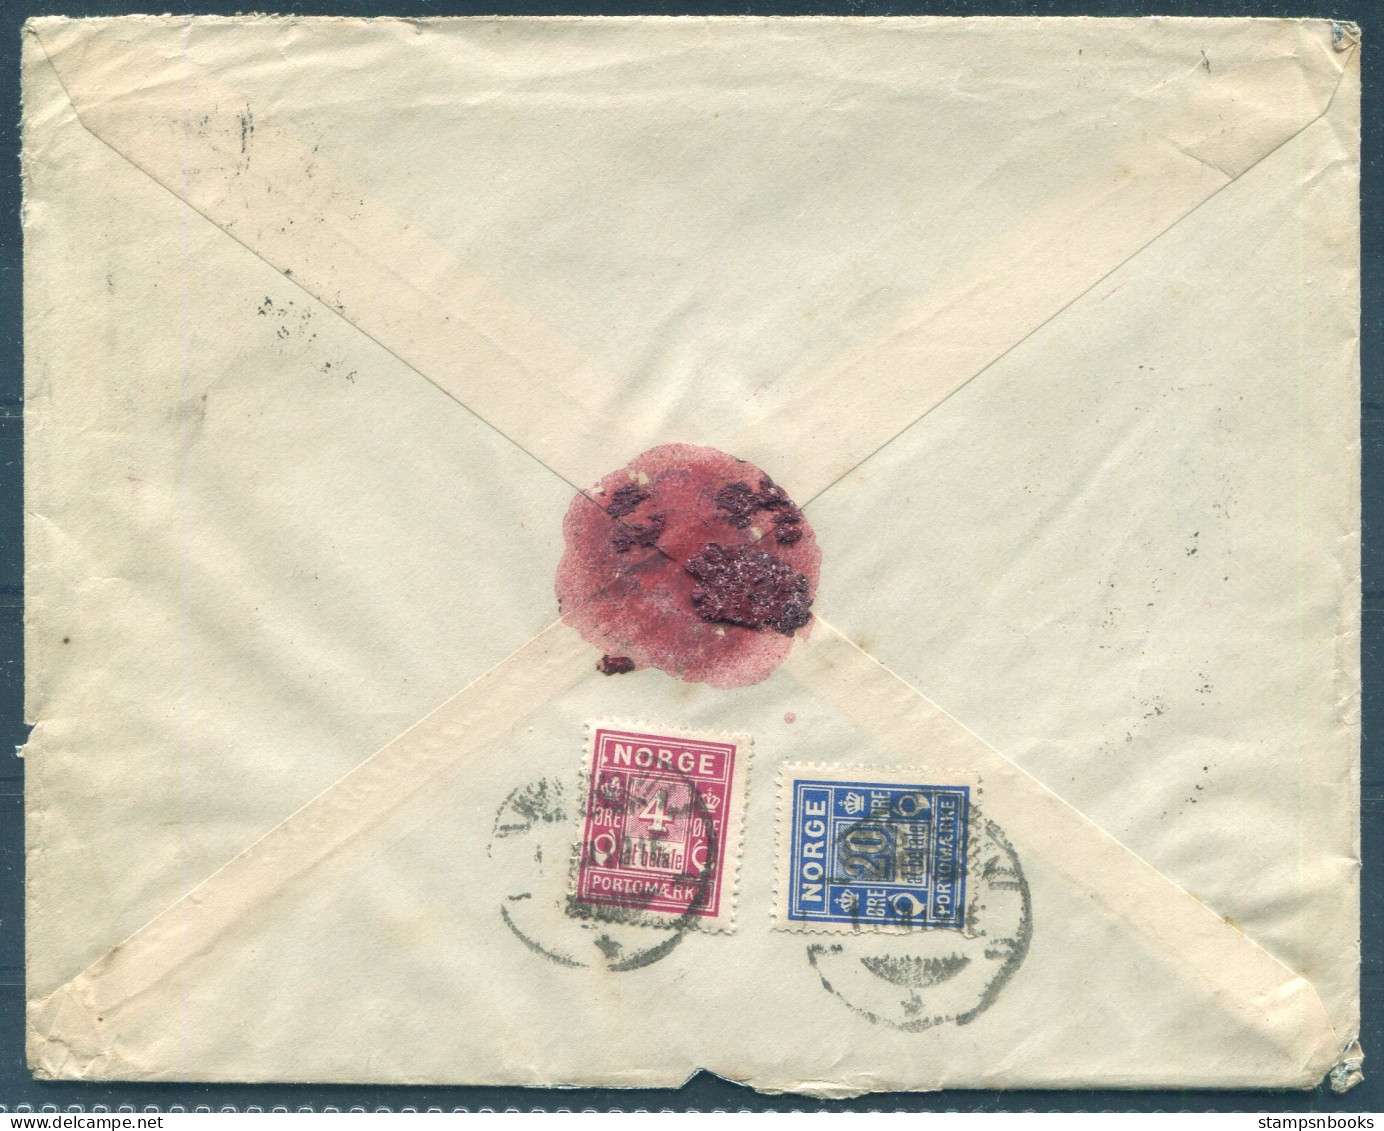 1919 Germany Breslau Postage Due, Taxe Postomaerke Cover - Kristiania Norway - Lettres & Documents